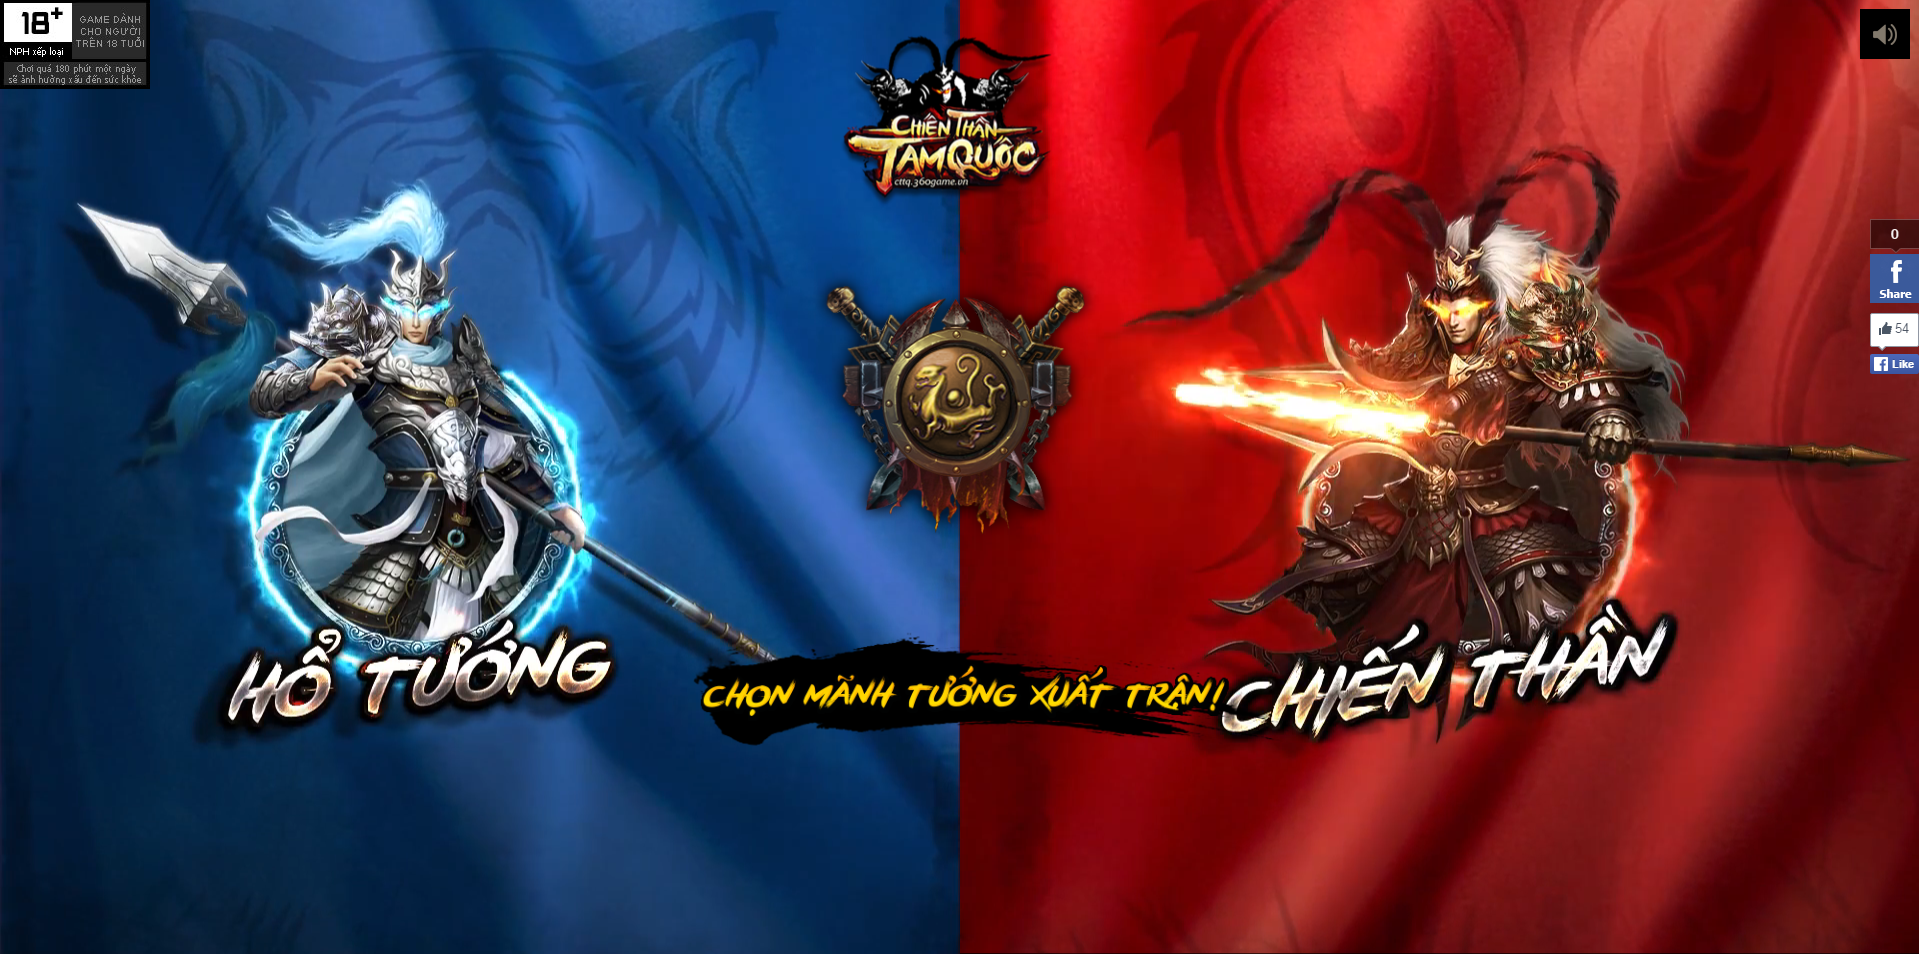 2game_chien_than_tam_quoc_ra_teaser_1.png (1919×954)